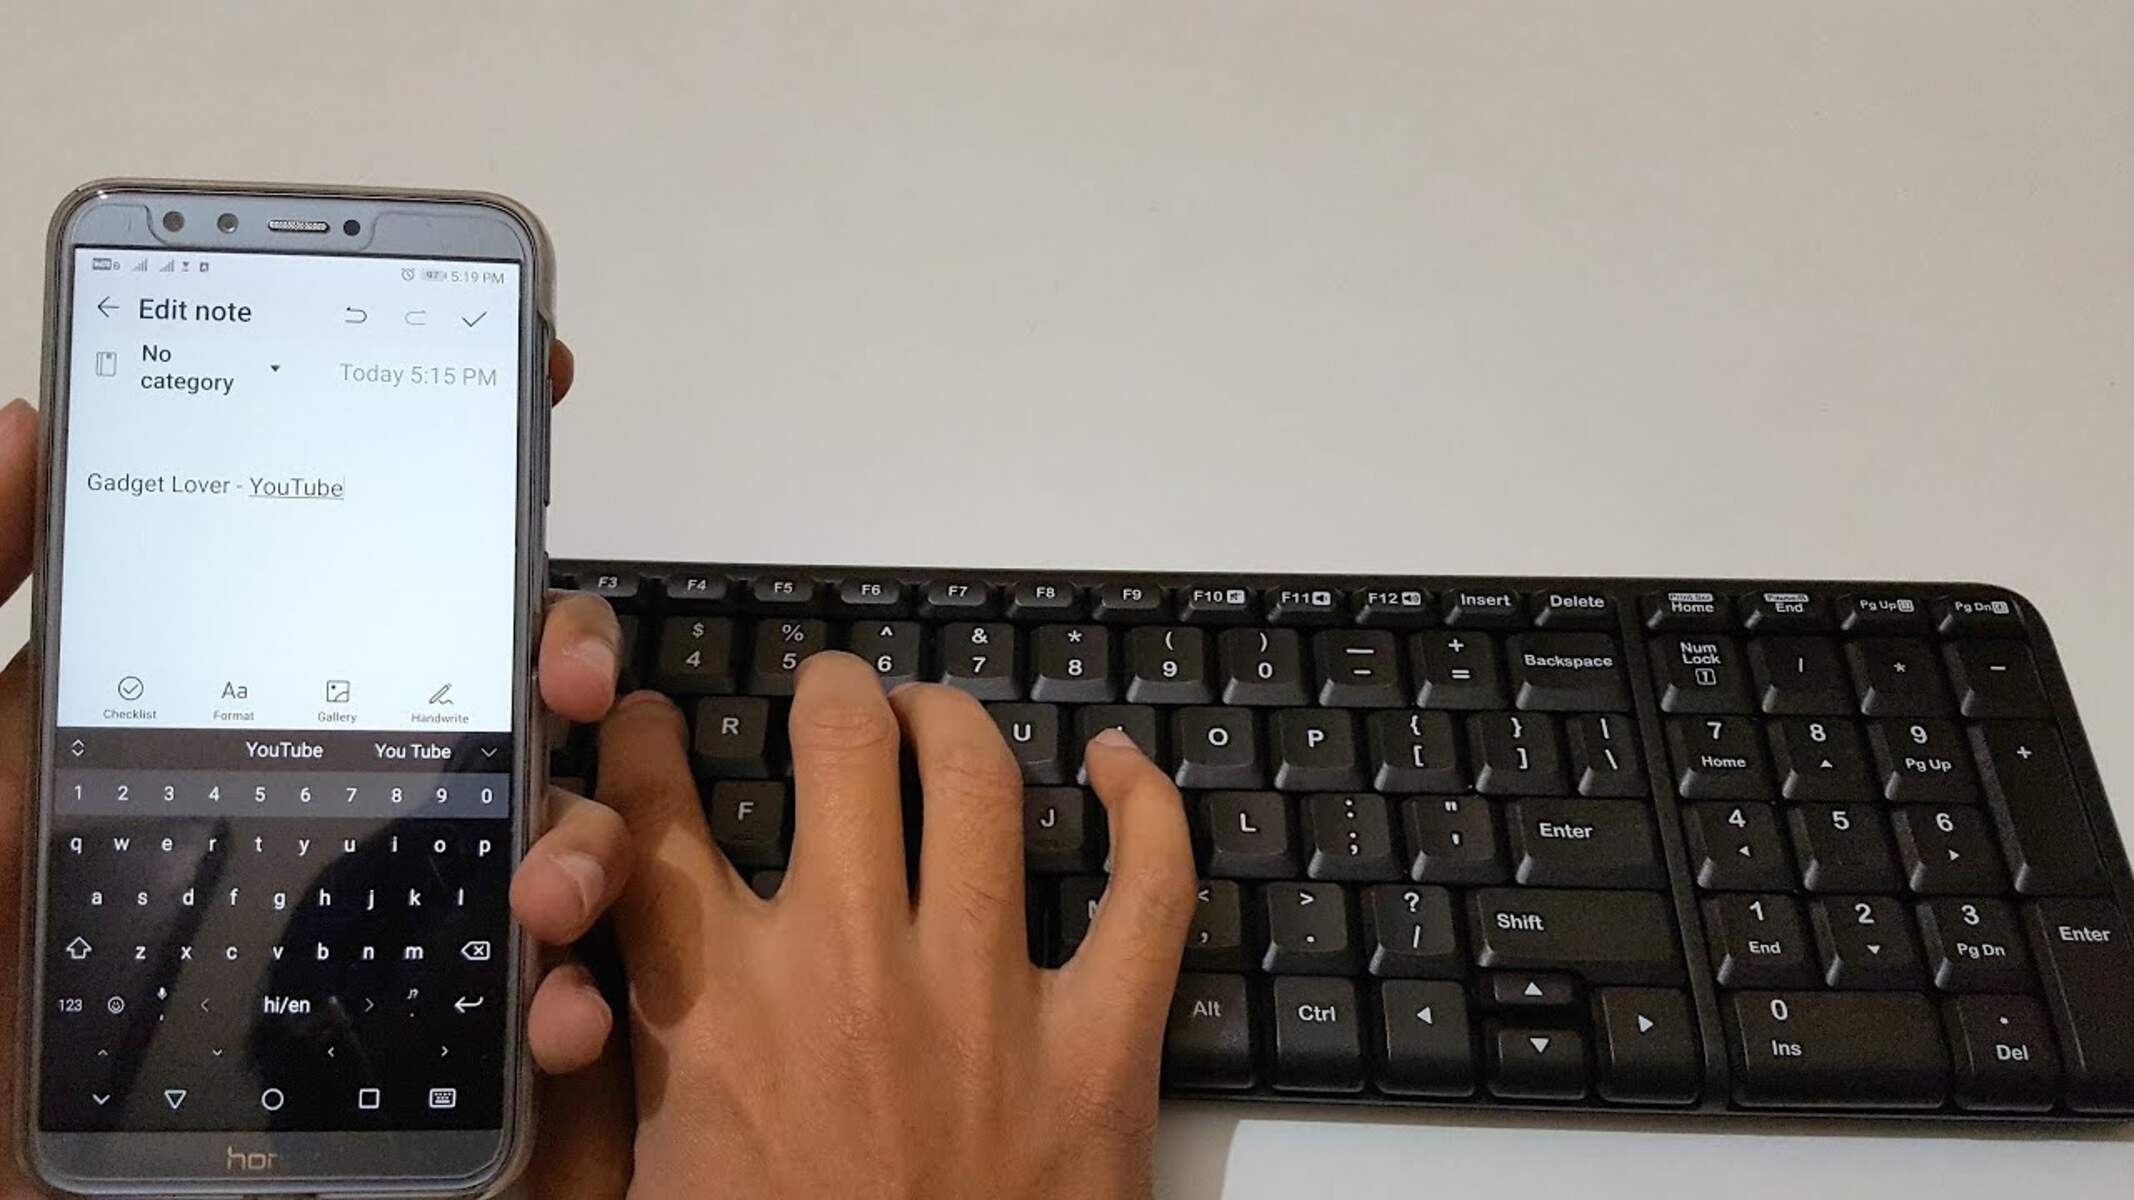 How Can You Connect A Portable Keyboard With A Smartphone?